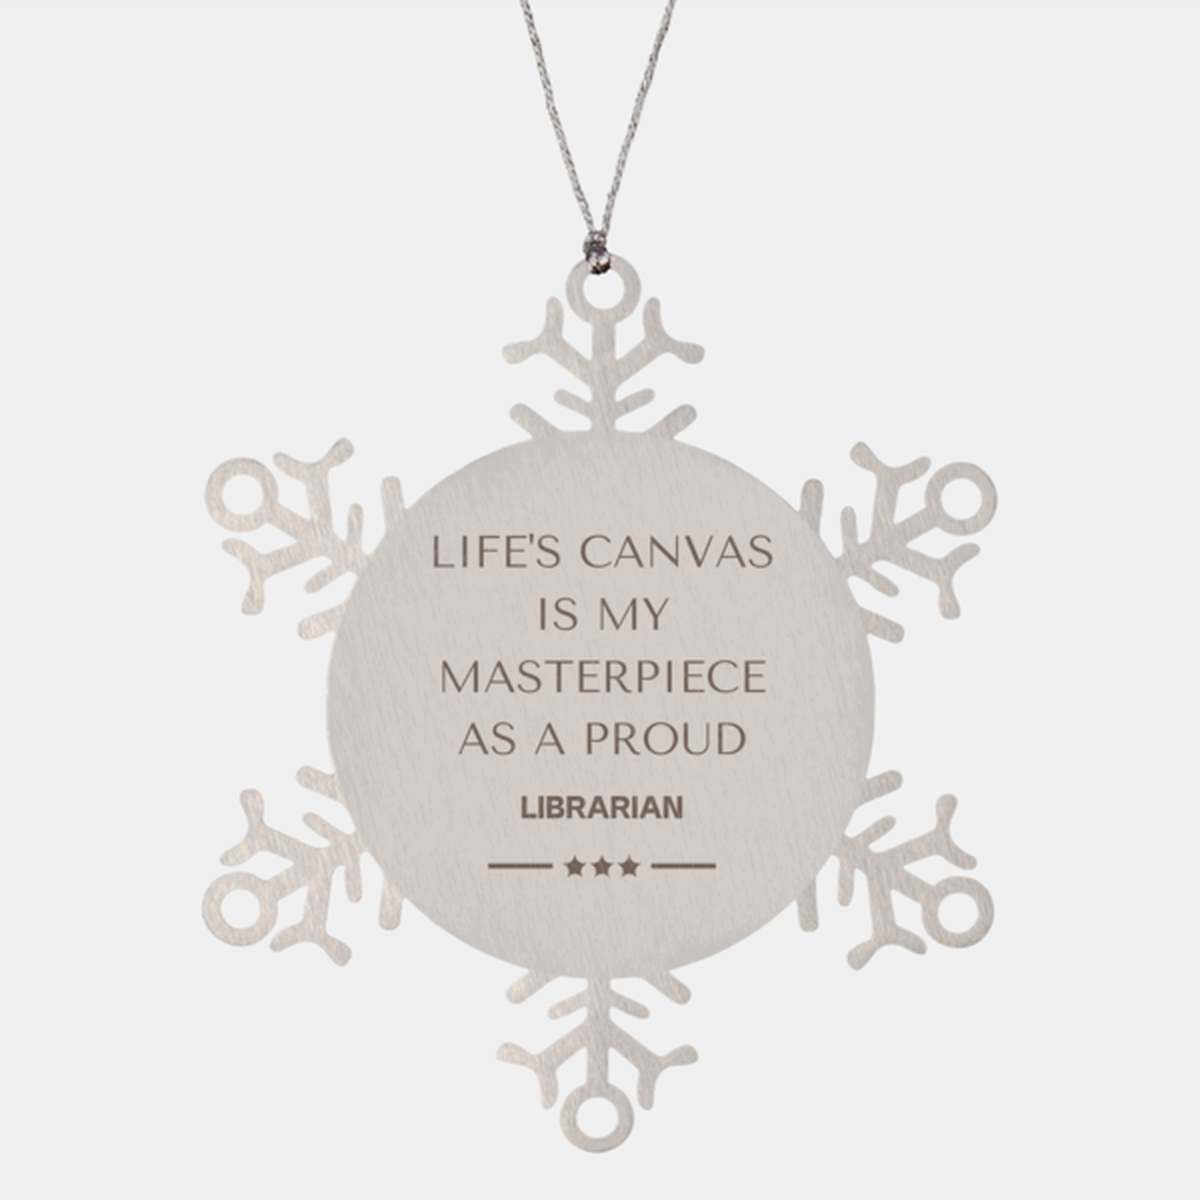 Proud Librarian Gifts, Life's canvas is my masterpiece, Epic Birthday Christmas Unique Snowflake Ornament For Librarian, Coworkers, Men, Women, Friends